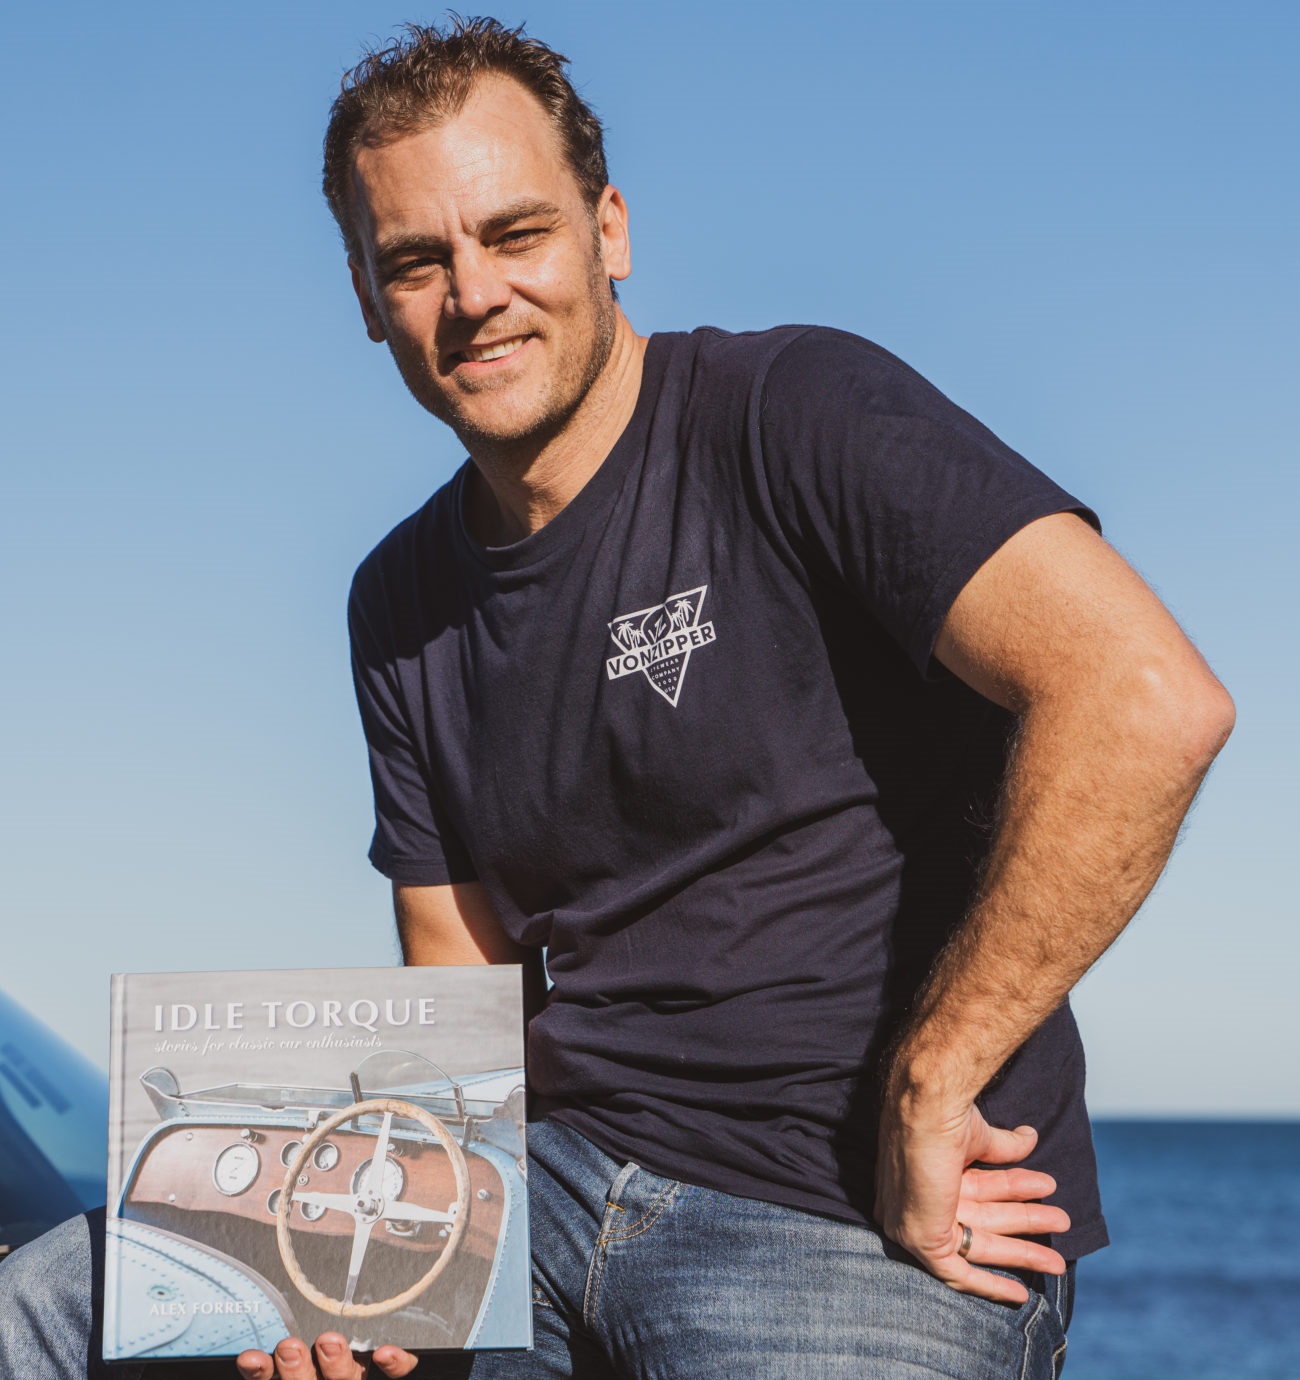 Author Alex Forrest wearing blue jeans and blue t-shirt holding a copy of his book Idle Torque